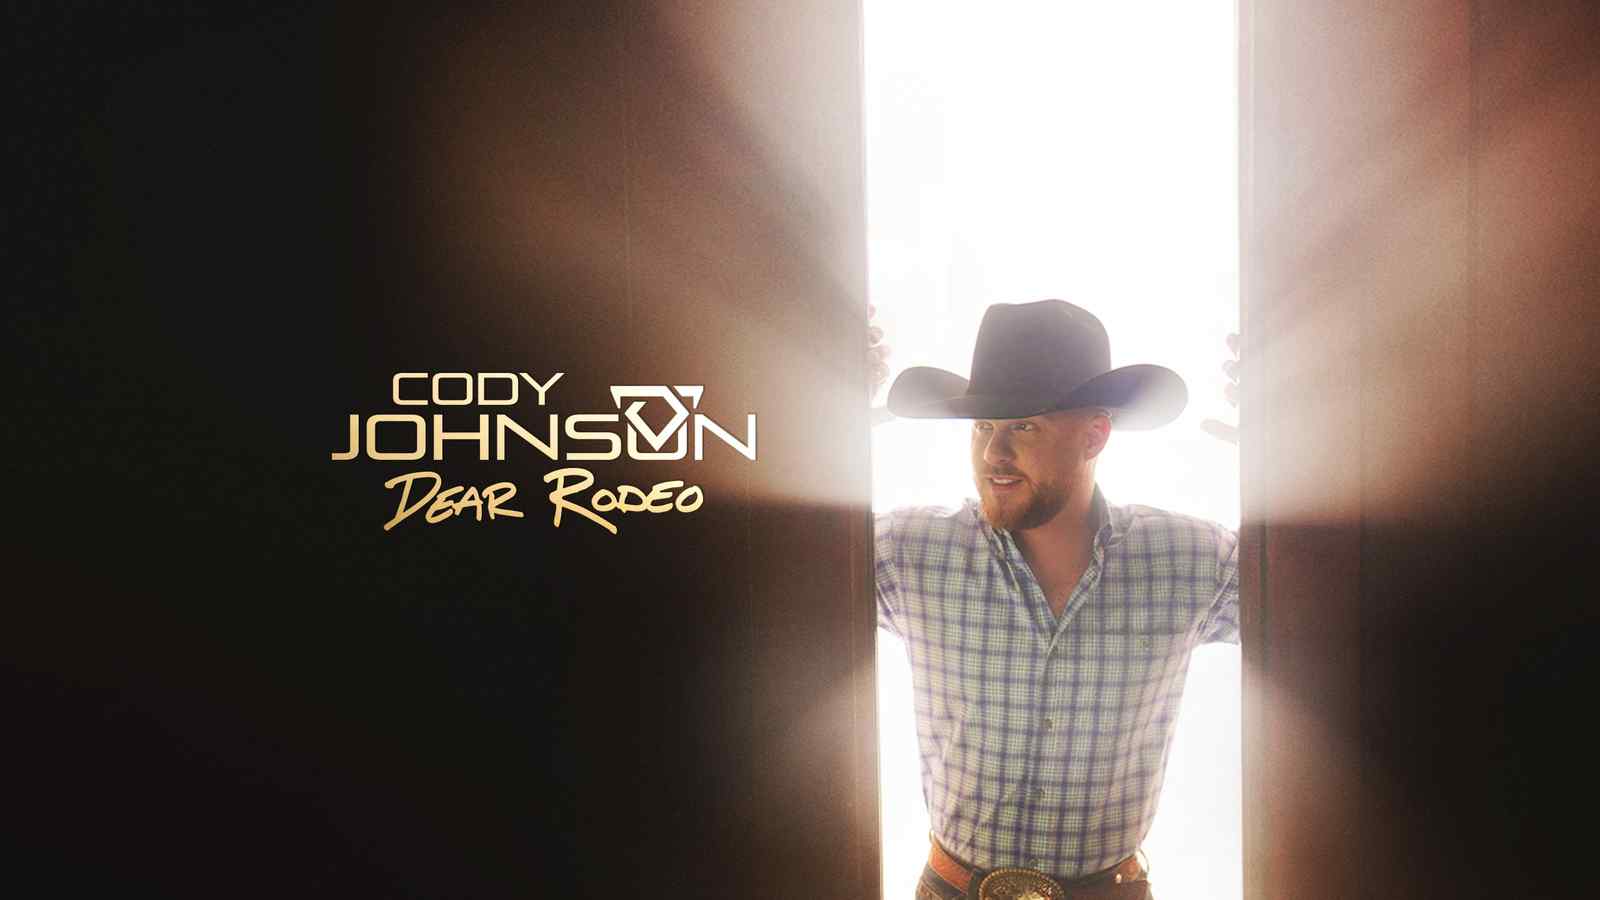 CODY JOHNSON TOP 3 MOST-ADDED AT COUNTRY RADIO TODAY WITH REFLECTIVE SINGLE “DEAR RODEO”